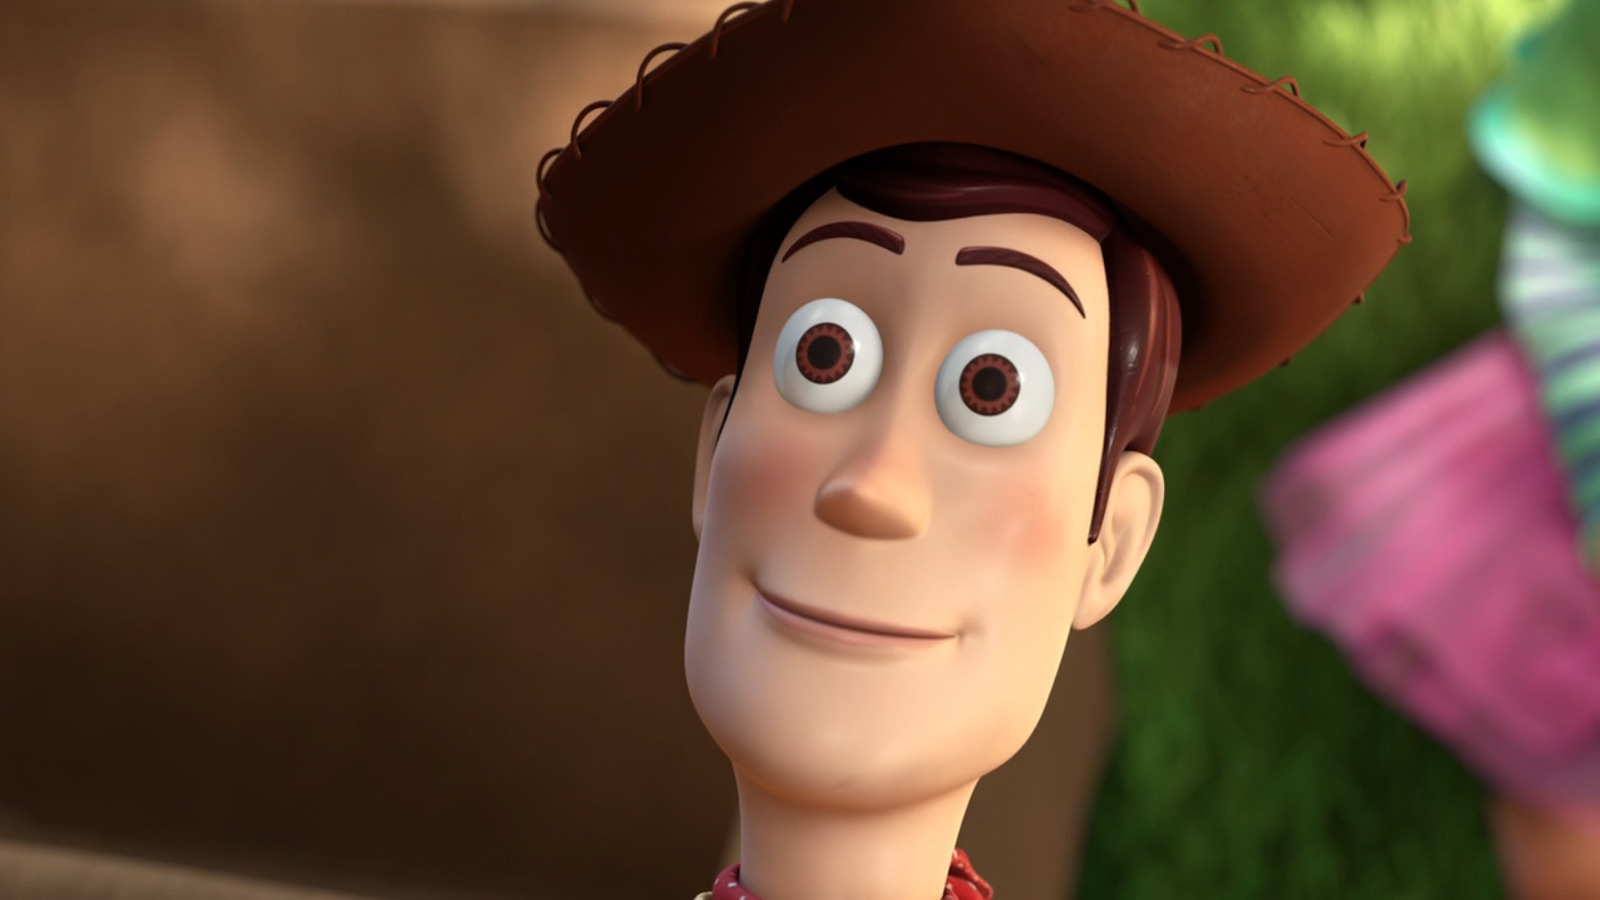 The Toy Story movies are really about Woody growing from child to